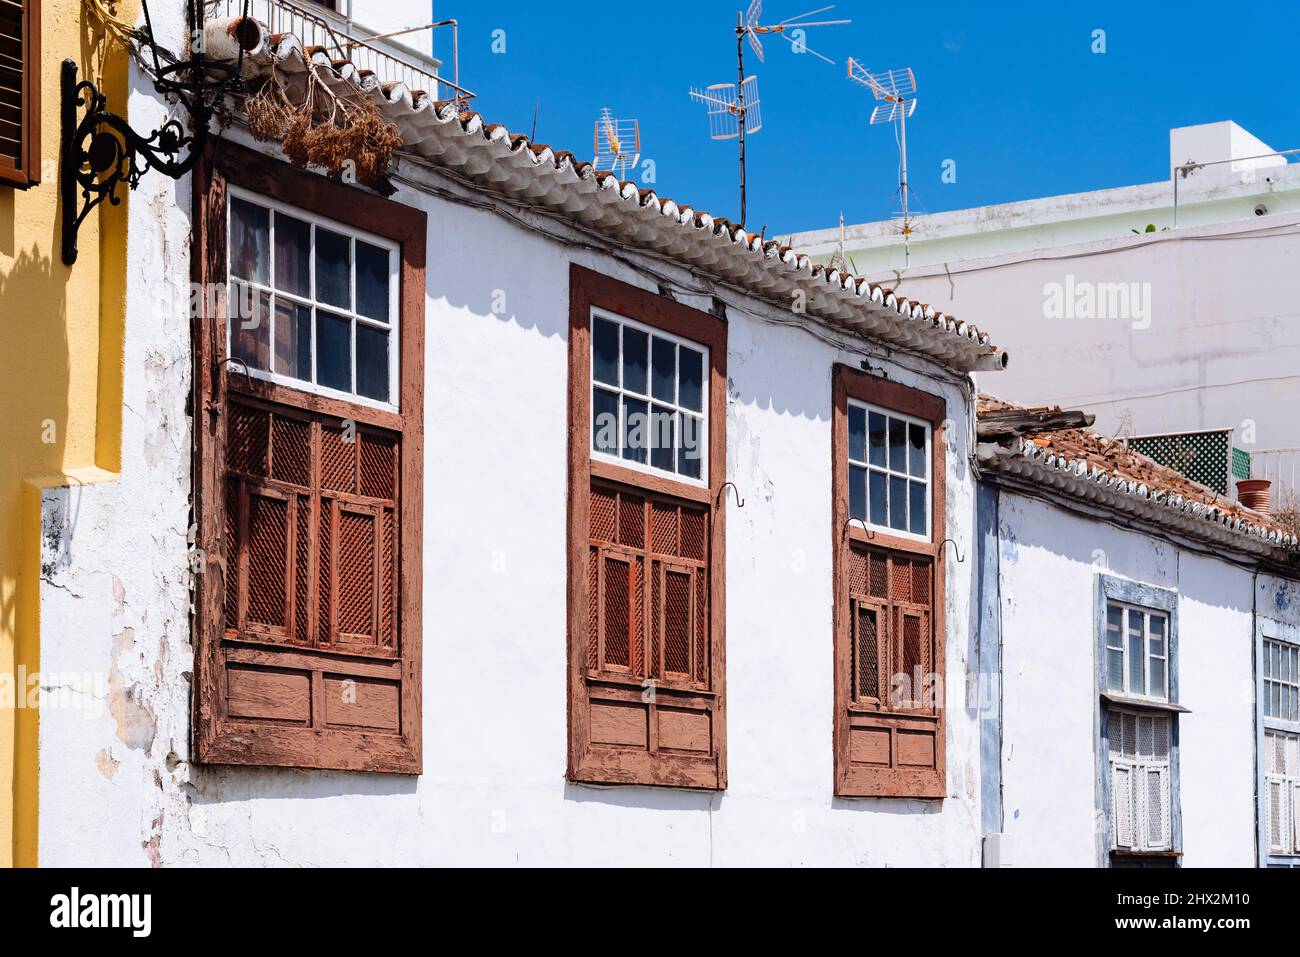 Traditional colonial architecture of Canary islands with colorful houses in the capital of La Palma, Santa Cruz de la Palma. San Telmo Street in the Stock Photo